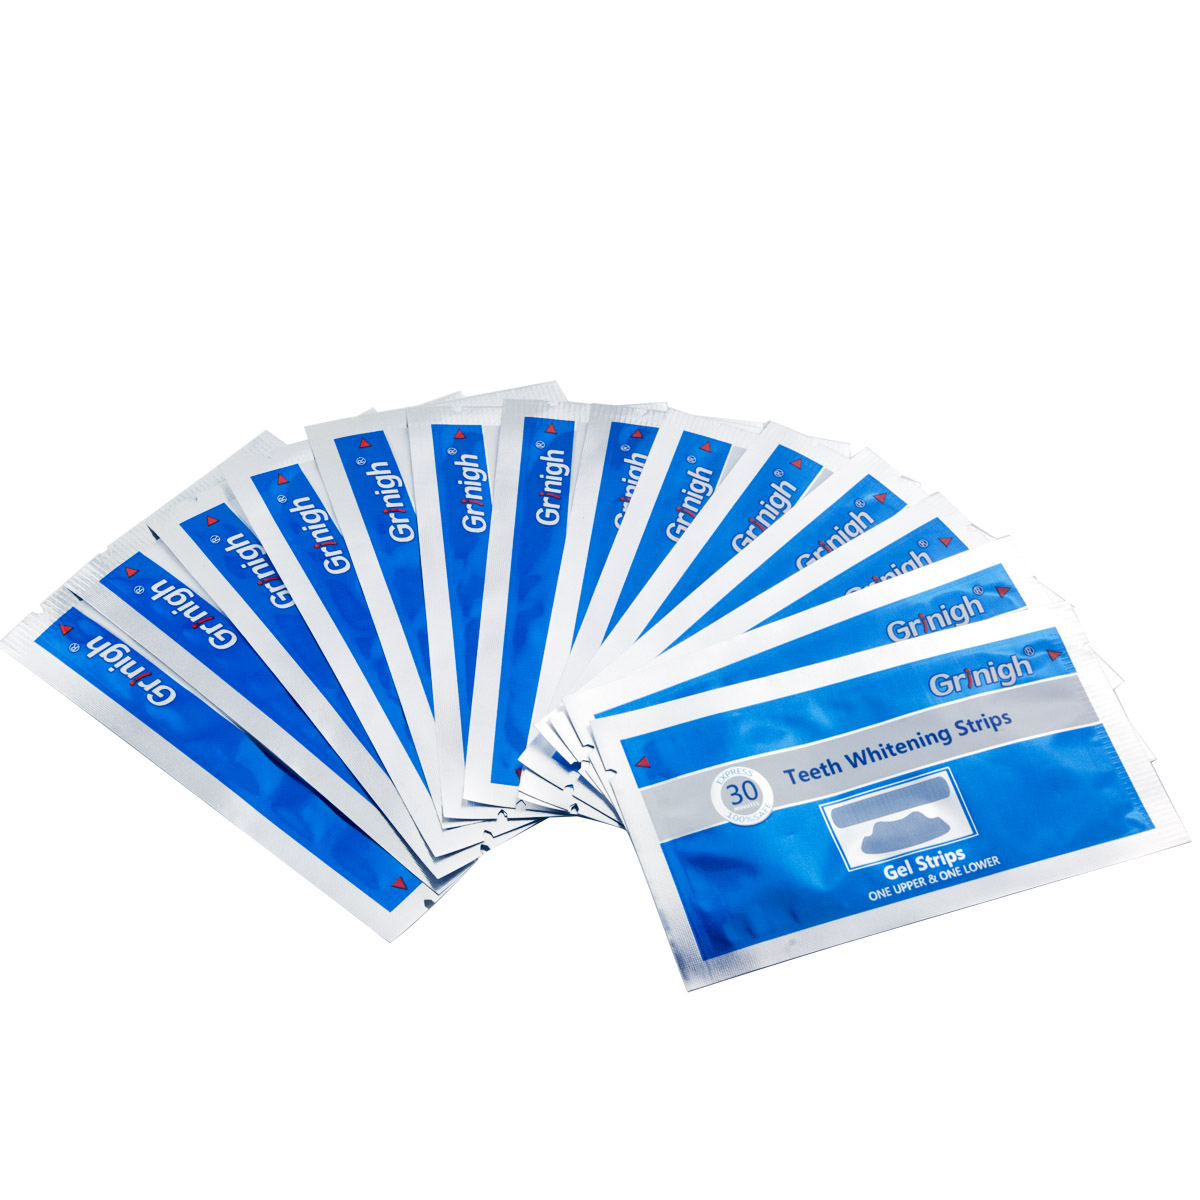 Grin365 Bright Touch Teeth Whitening Strips with Fresh Mint Flavor - 7 Treatments